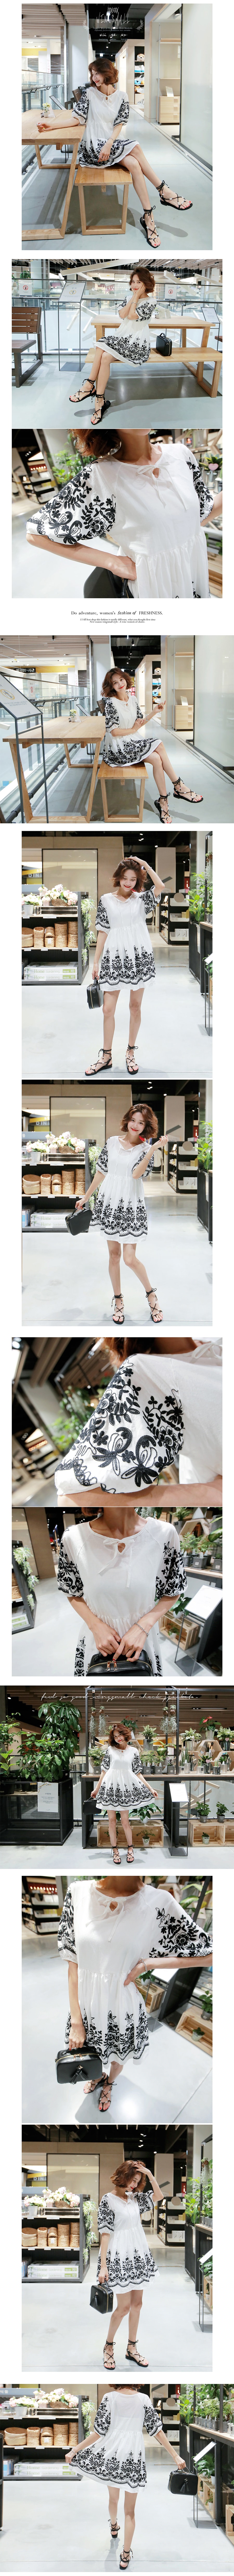 [KOREA] Floral-Embroidered Flare Mini Dress #White One Size(S-M) [Free Shipping]